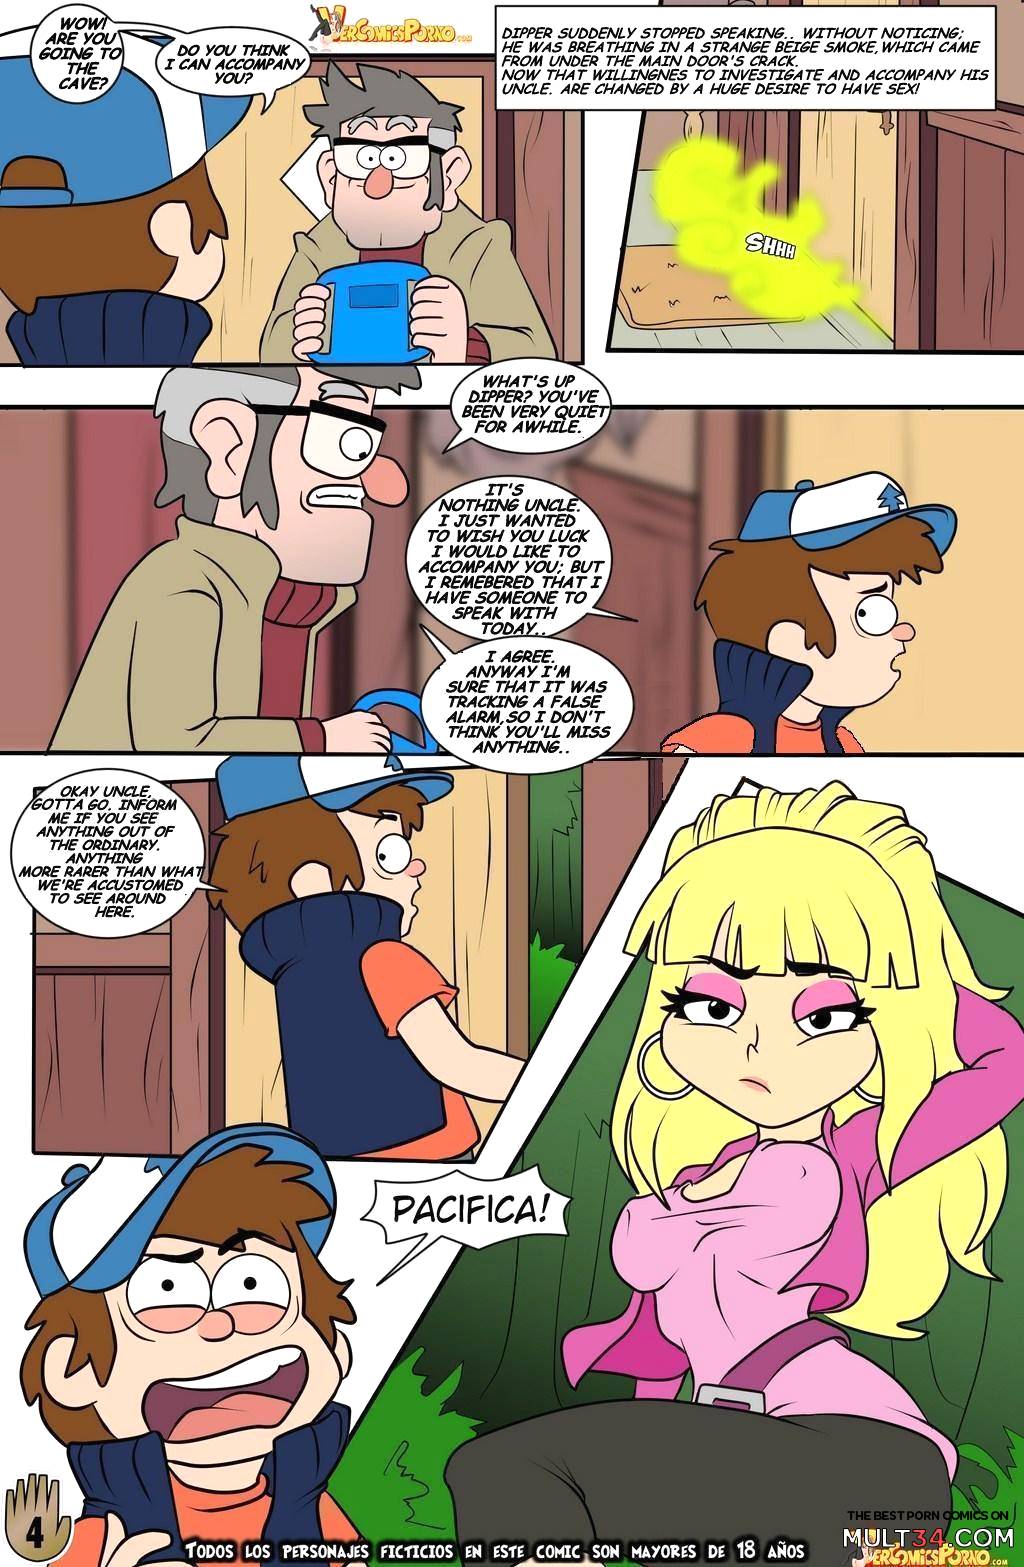 Gravity Falls - One Summer of Pleasure 2 page 5